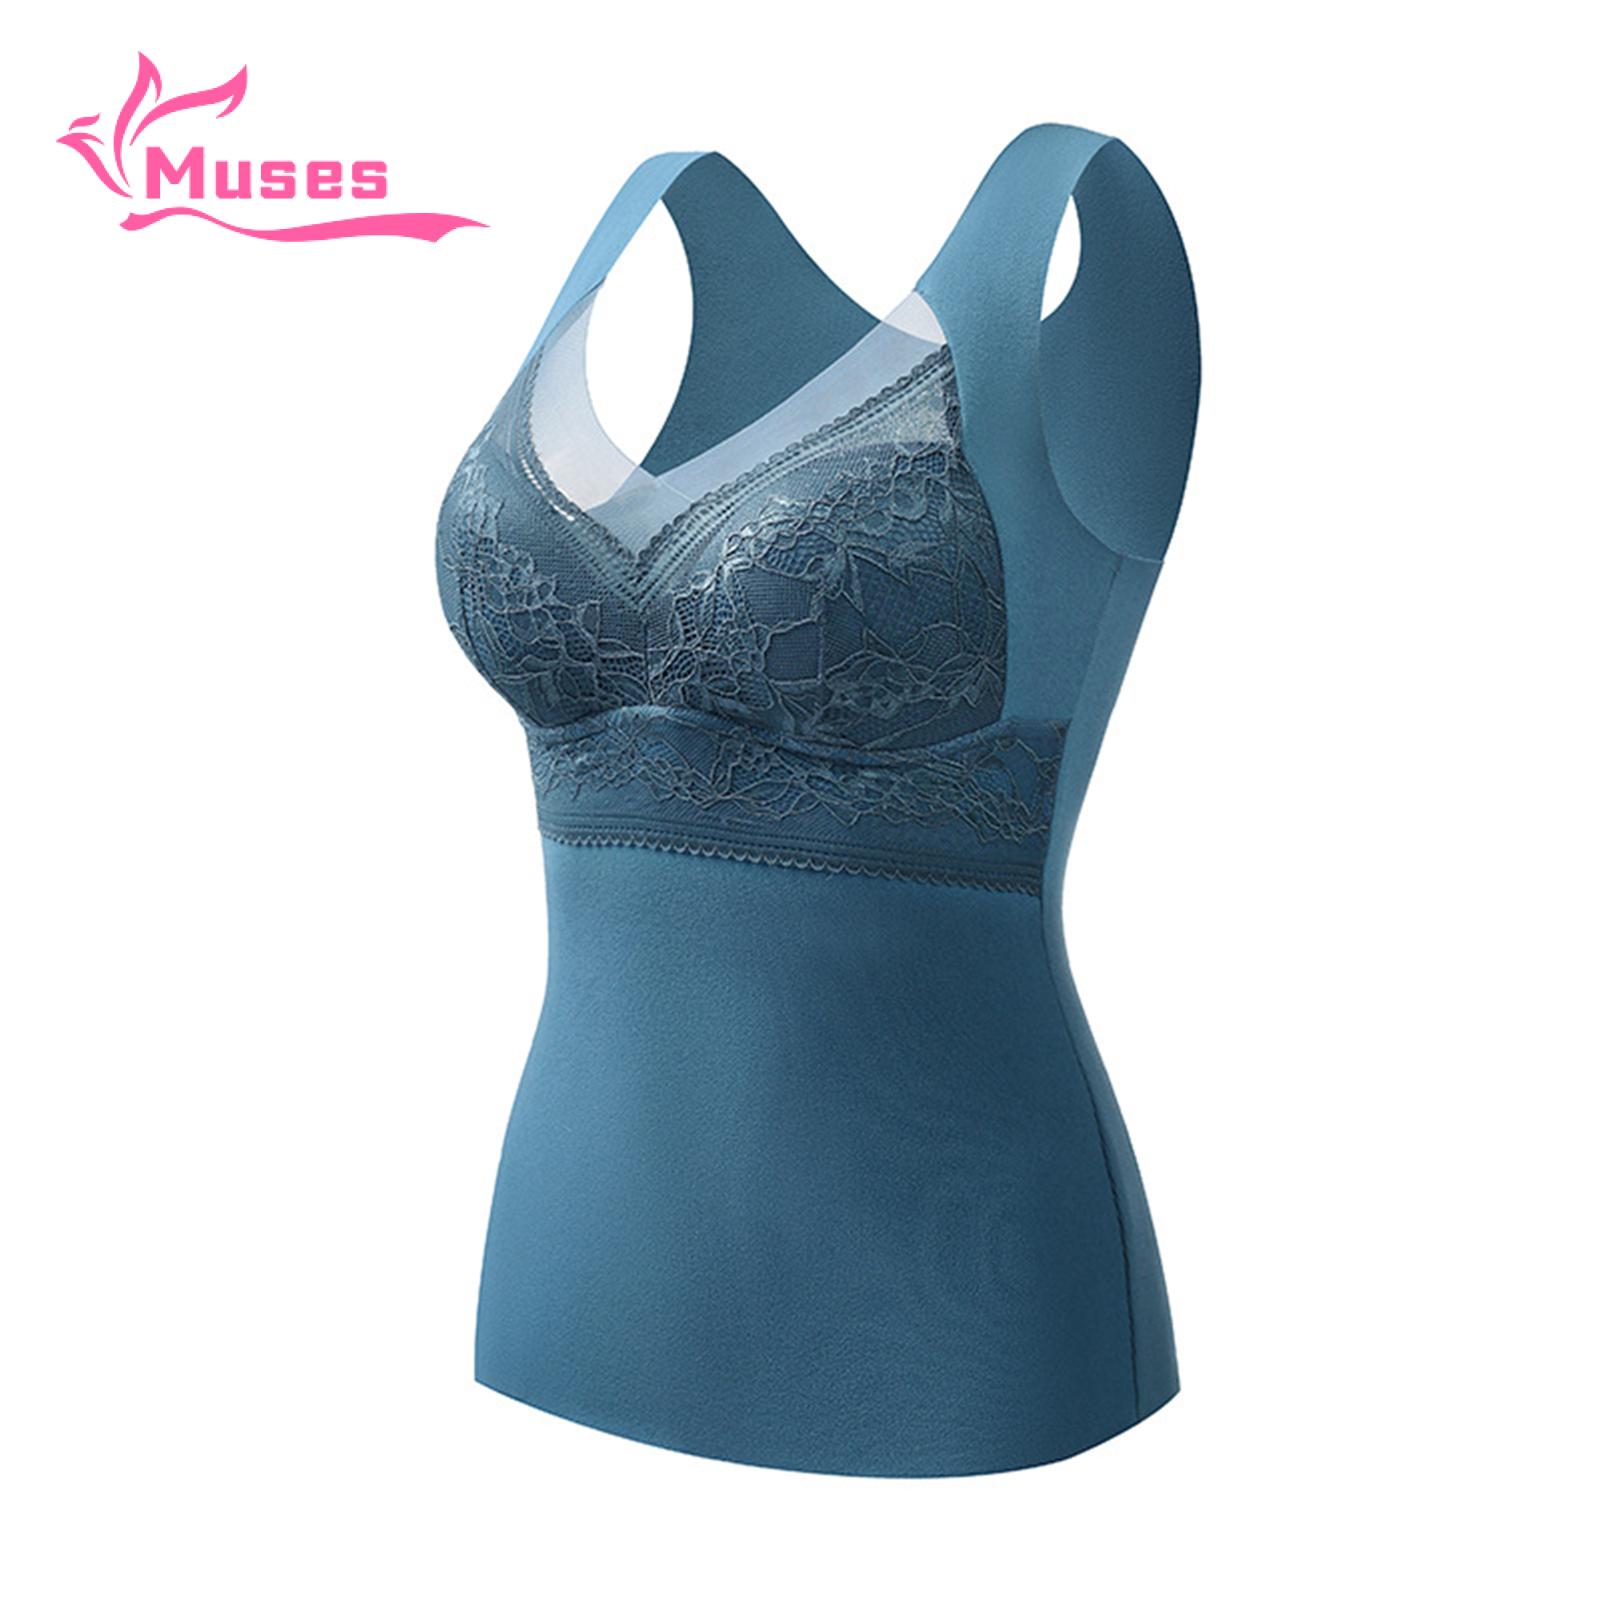 Muses Mall Thermal Vest Embroidery Lace Decor Female Slim Darlon Lining  Warm Vest Style Bra